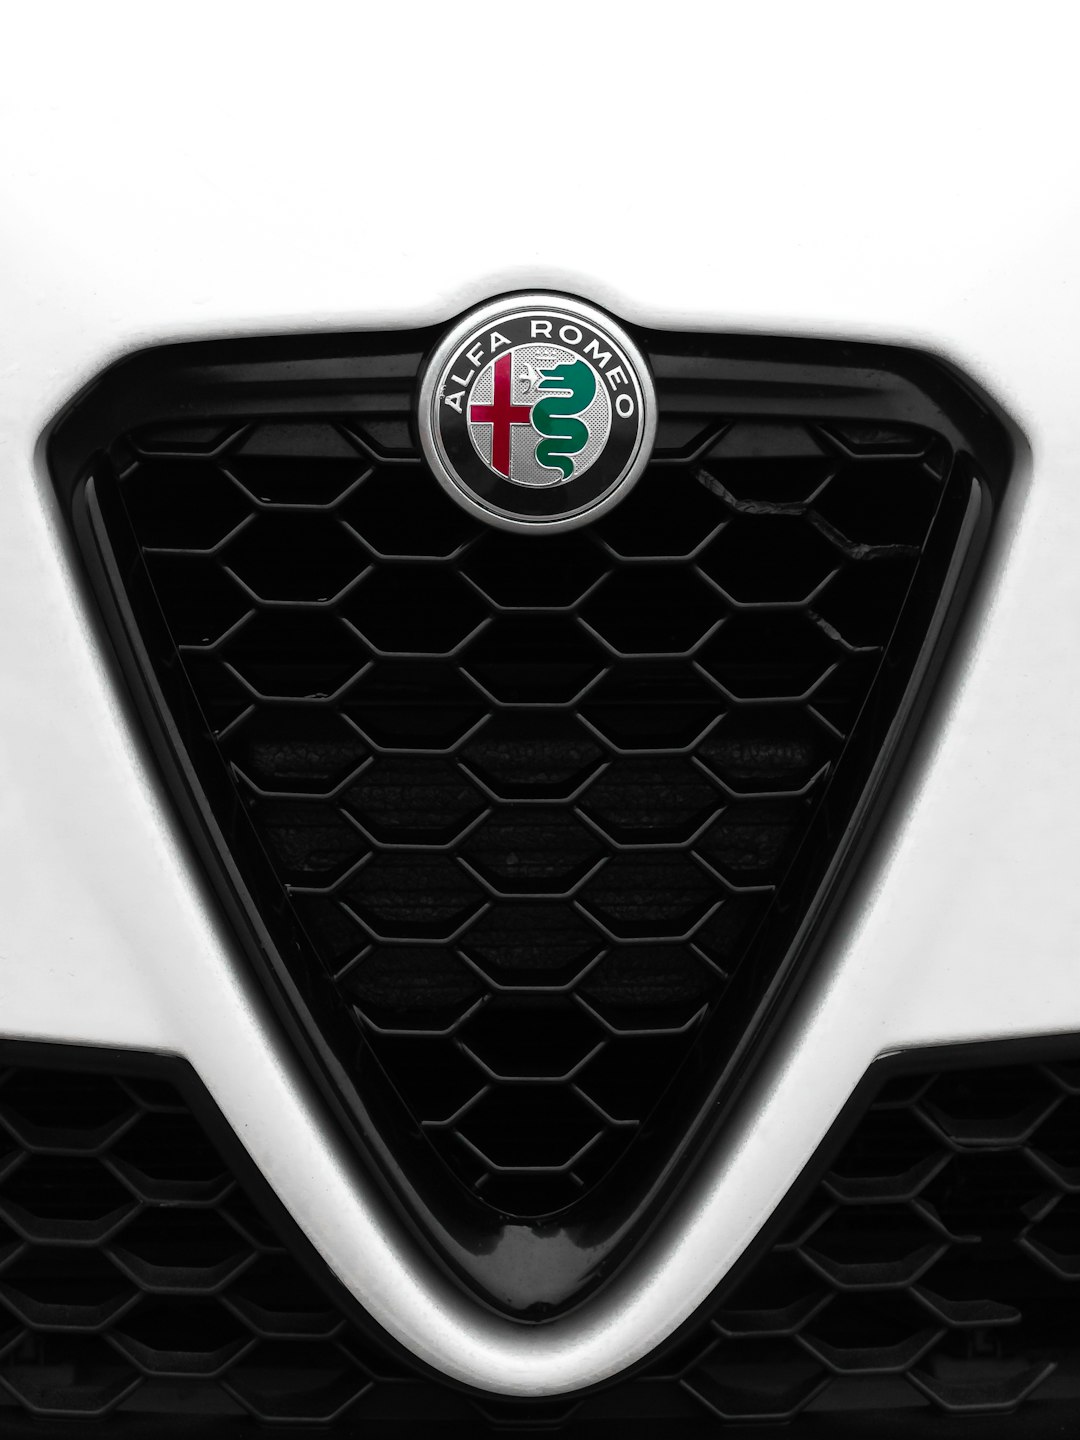 The Alfa Romeo Stelvio is a stylish and powerful luxury SUV that combines Italian craftsmanship with thrilling performance.